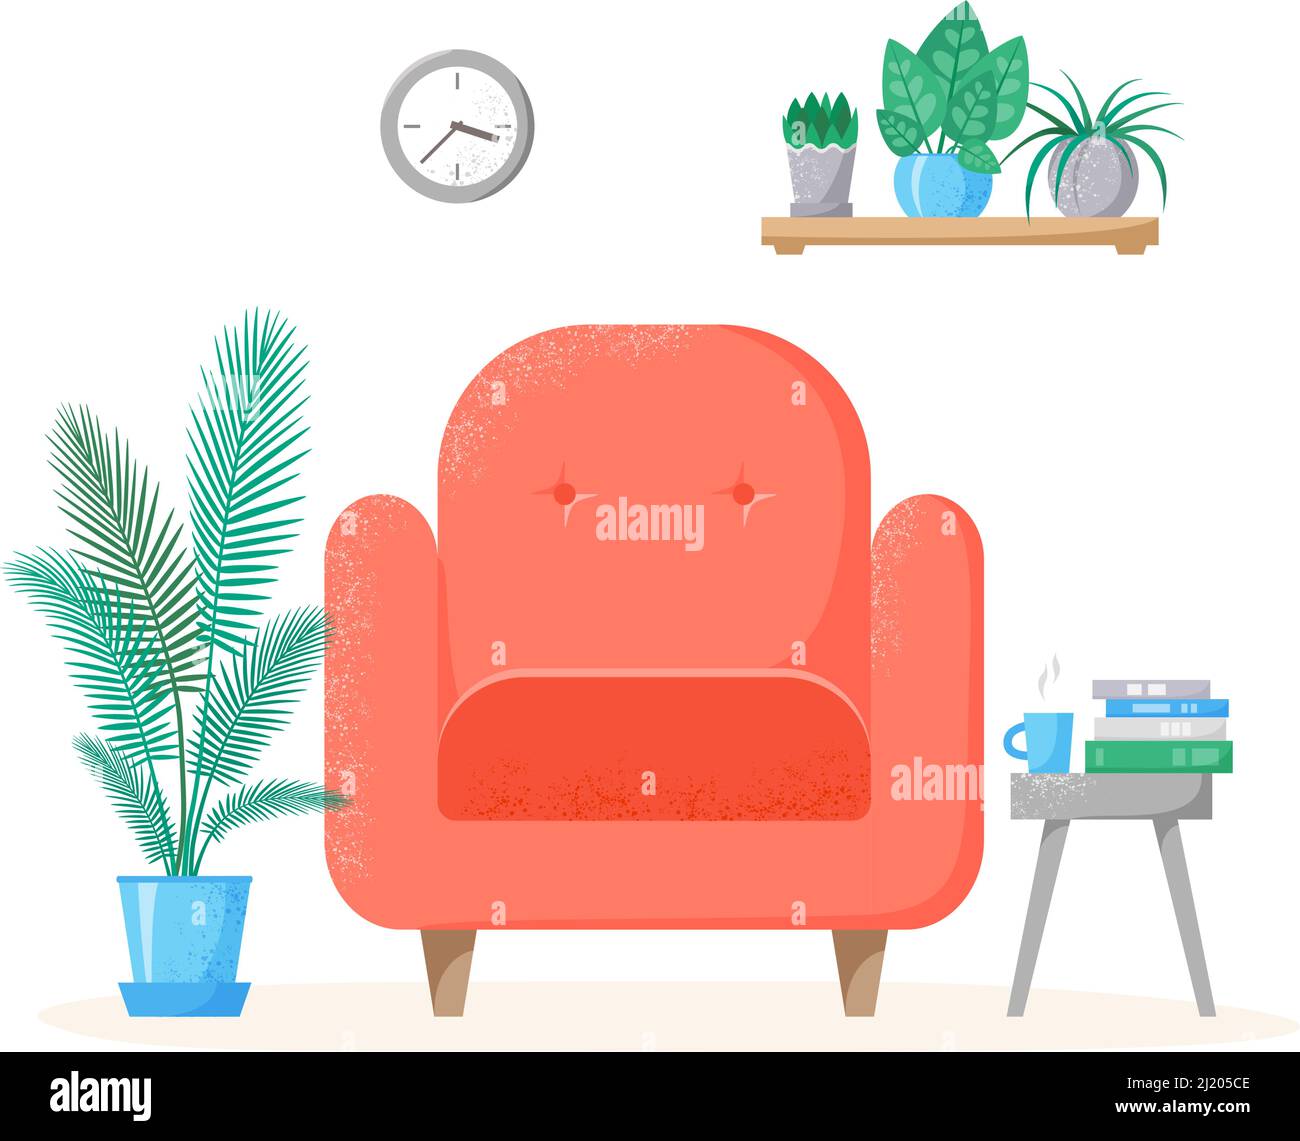 Living room interior with red chair, home plants in pots, table and books. Sweet home illustration. Flat style vector  Stock Vector